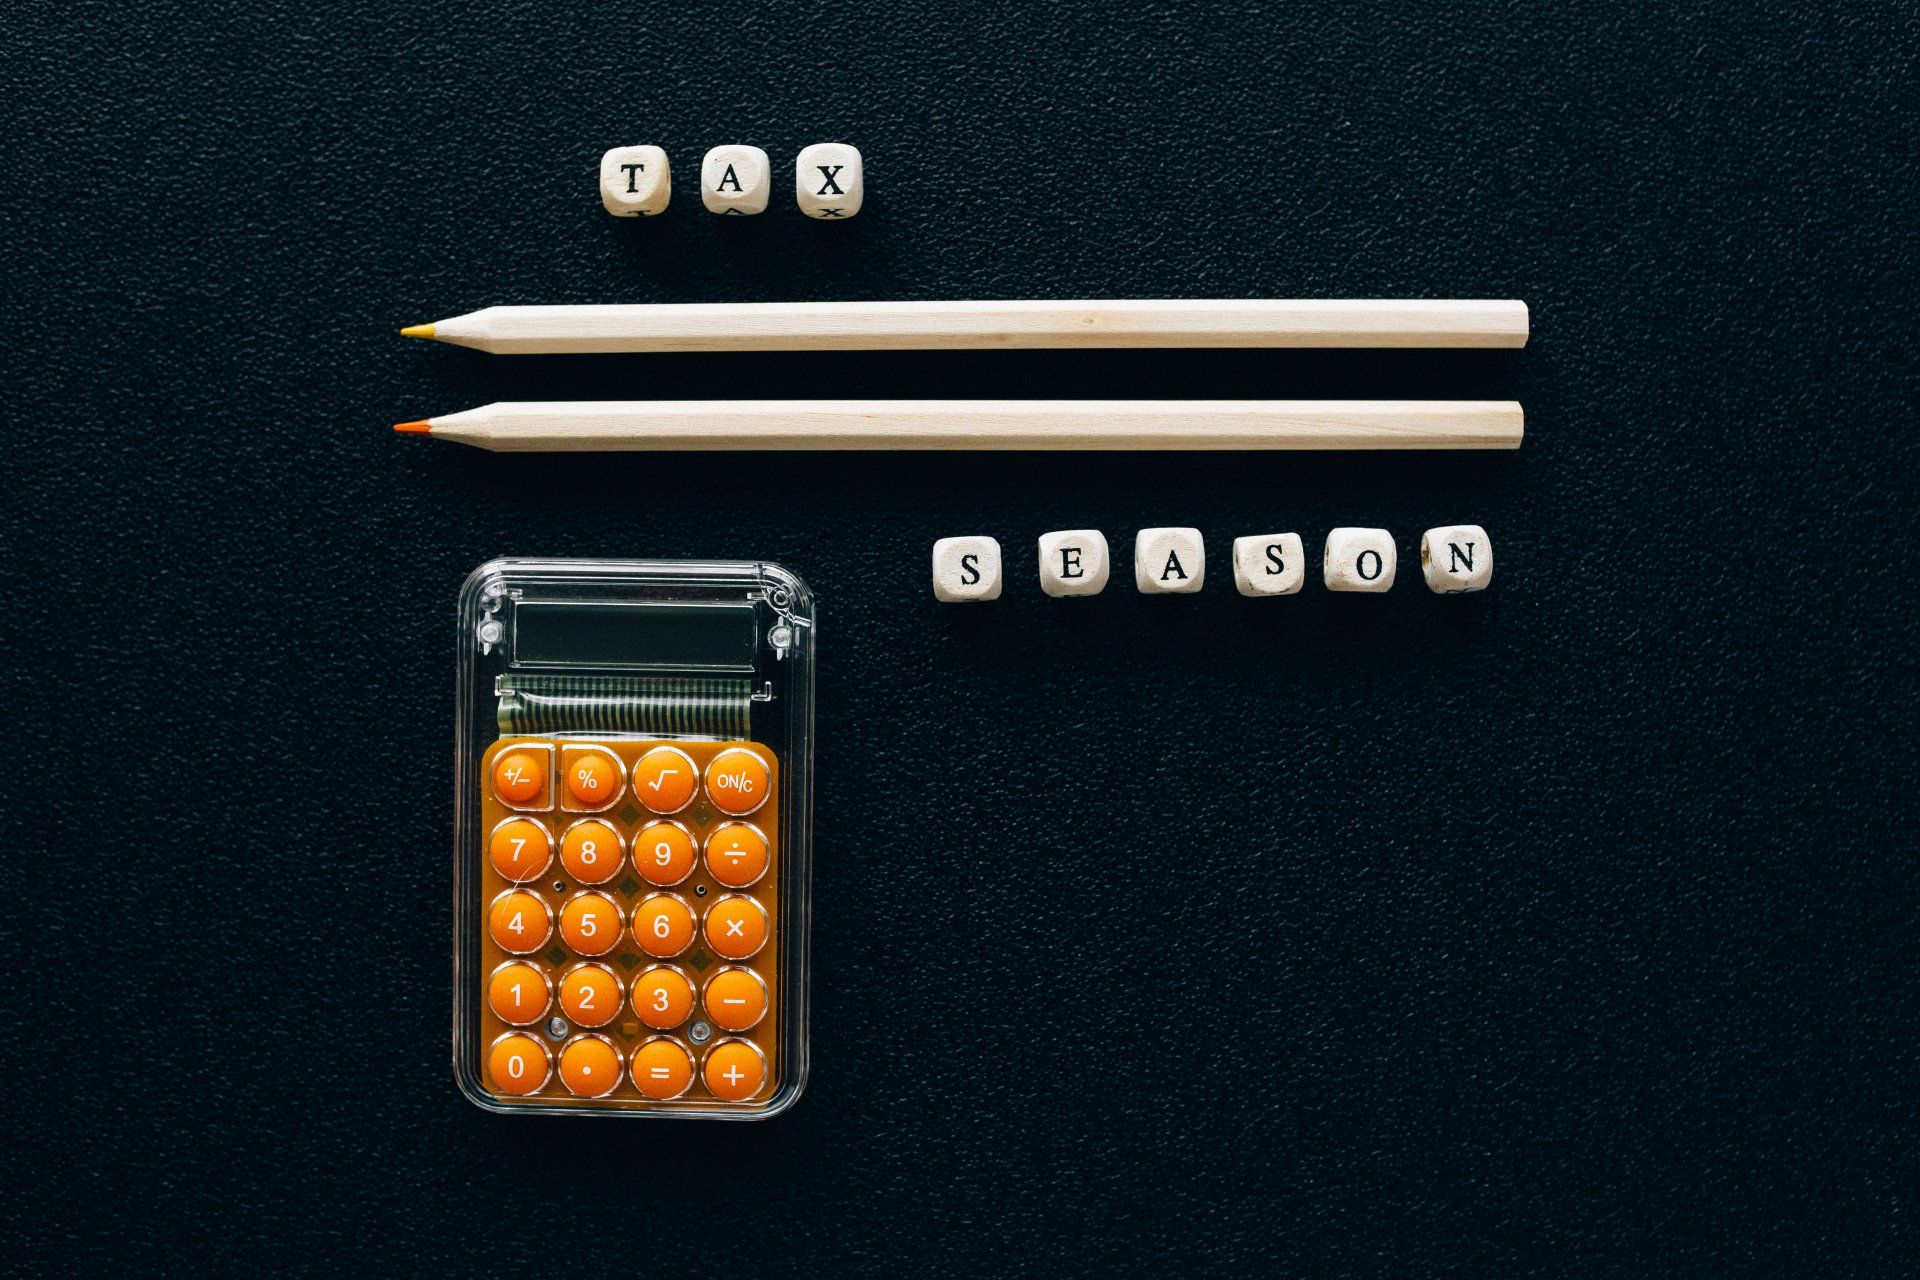 Image of calculator and pencil with words tax season